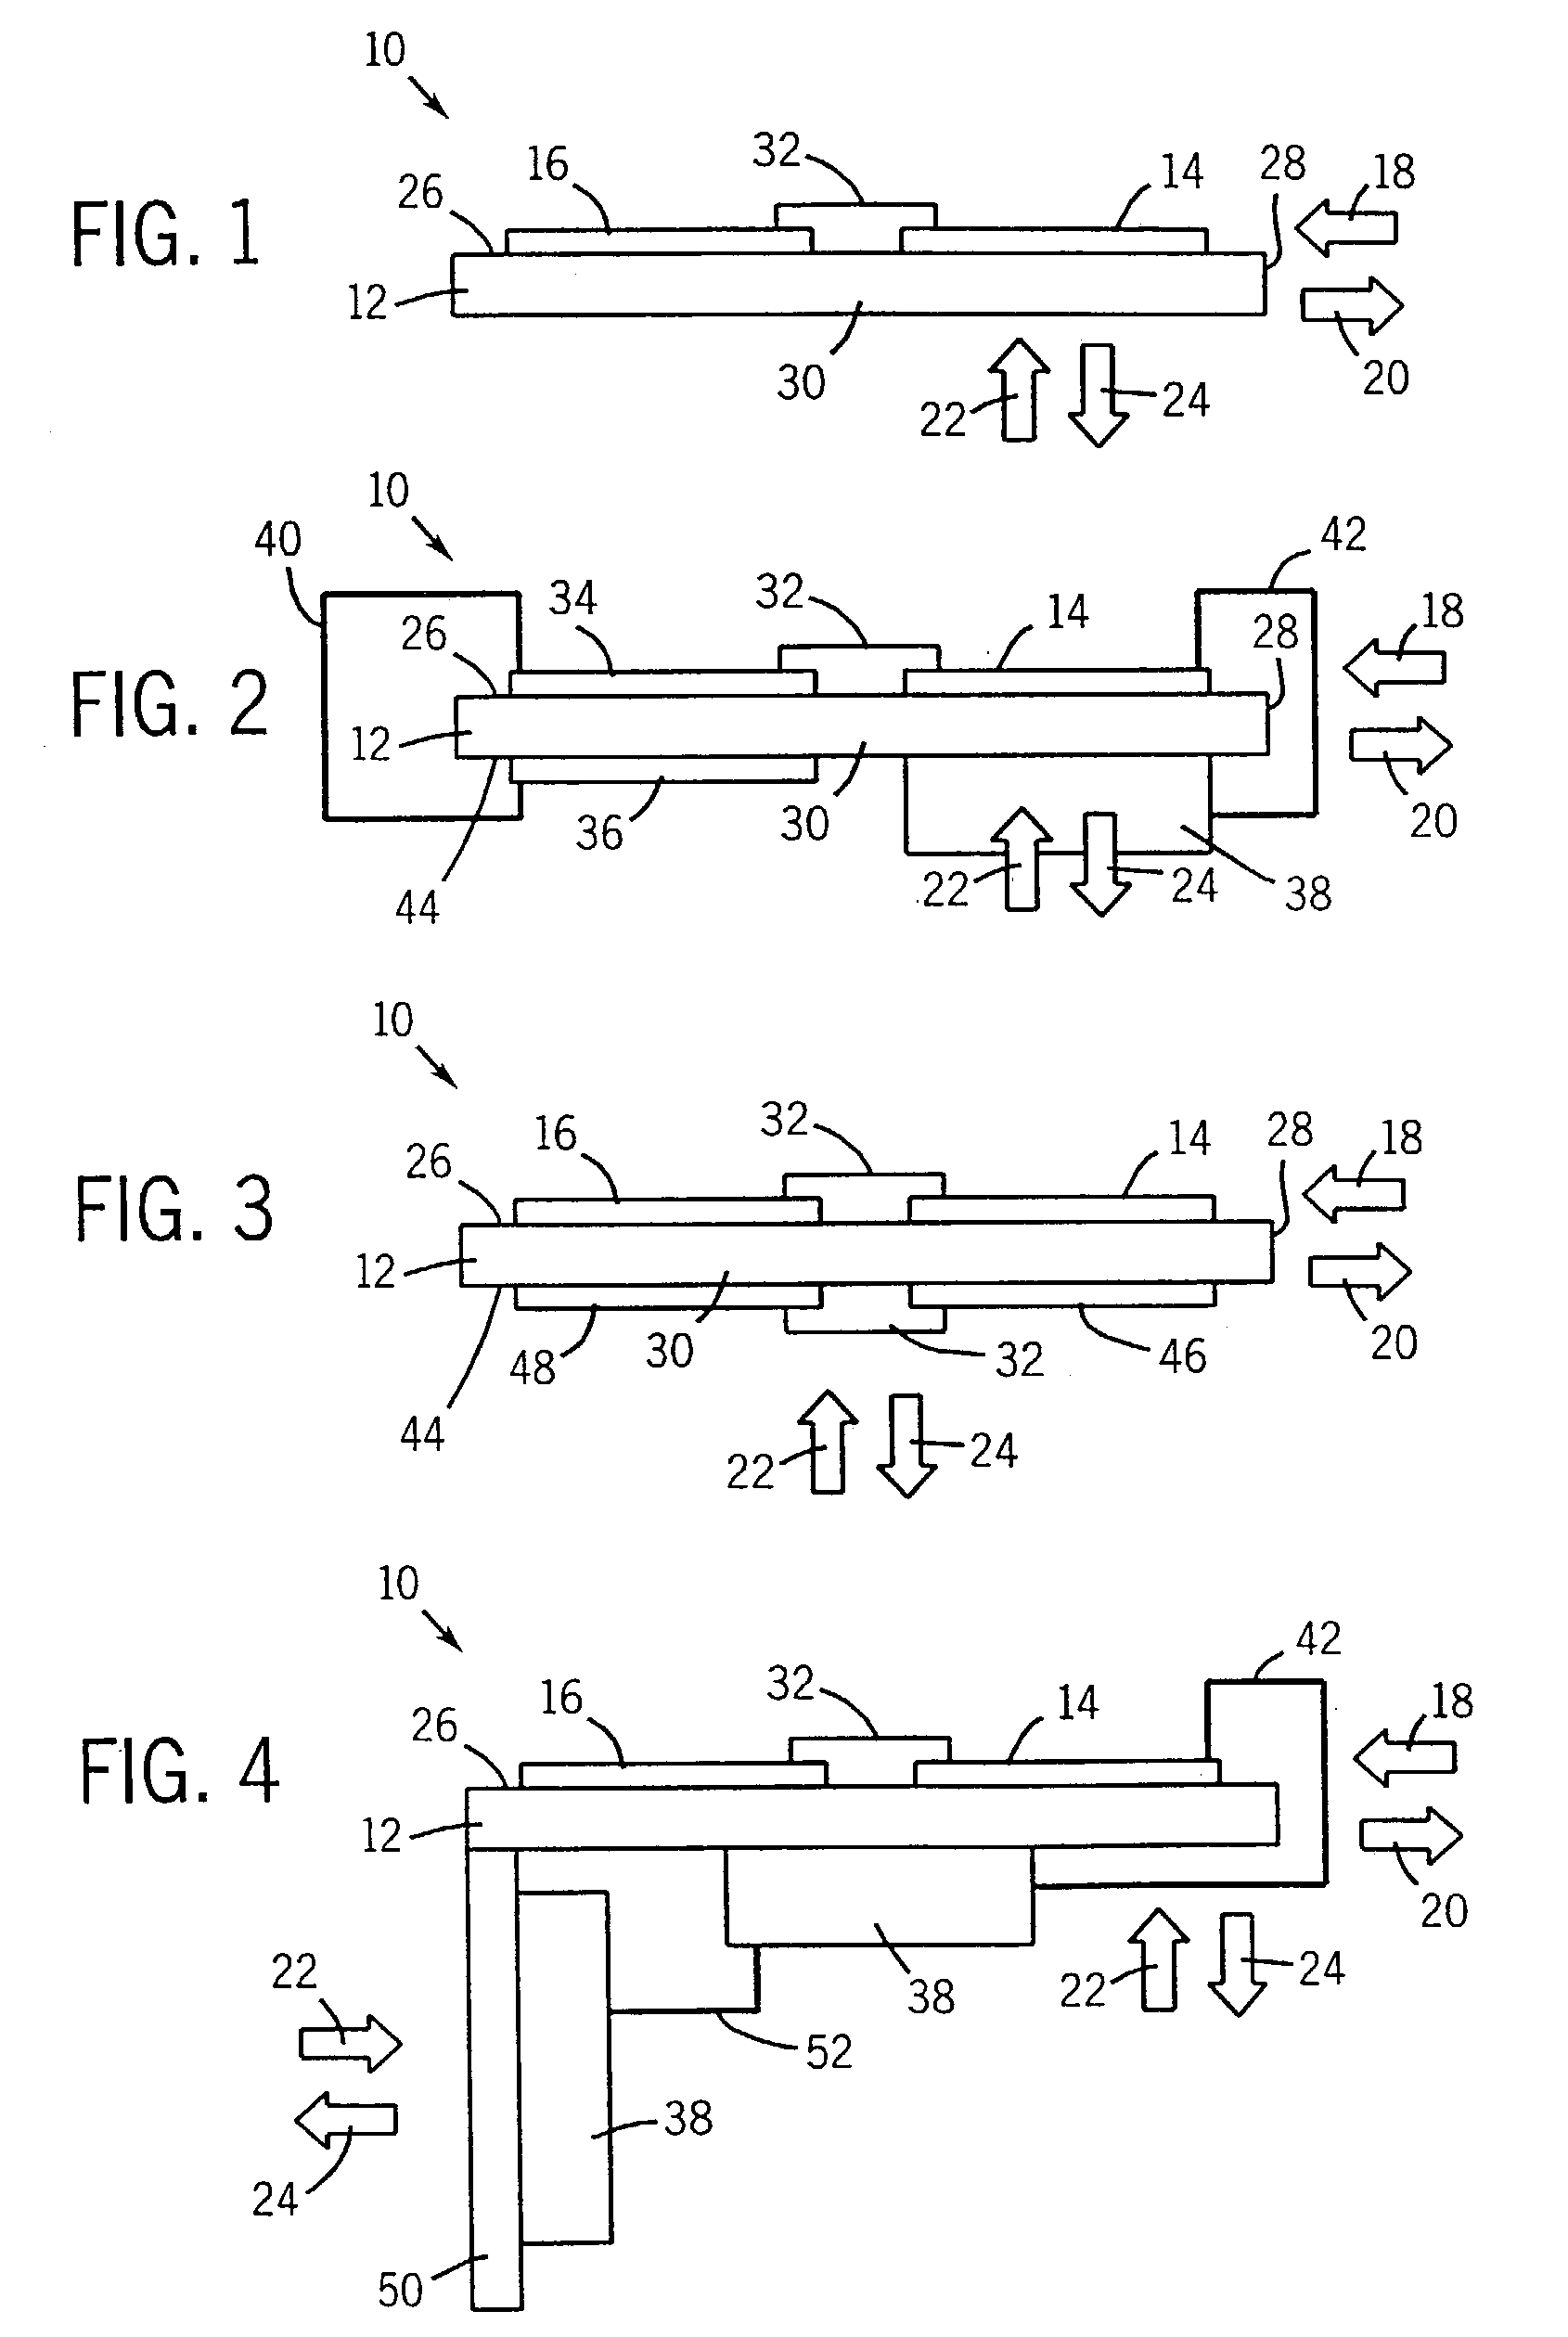 Vehicle drive module having improved cooling configuration